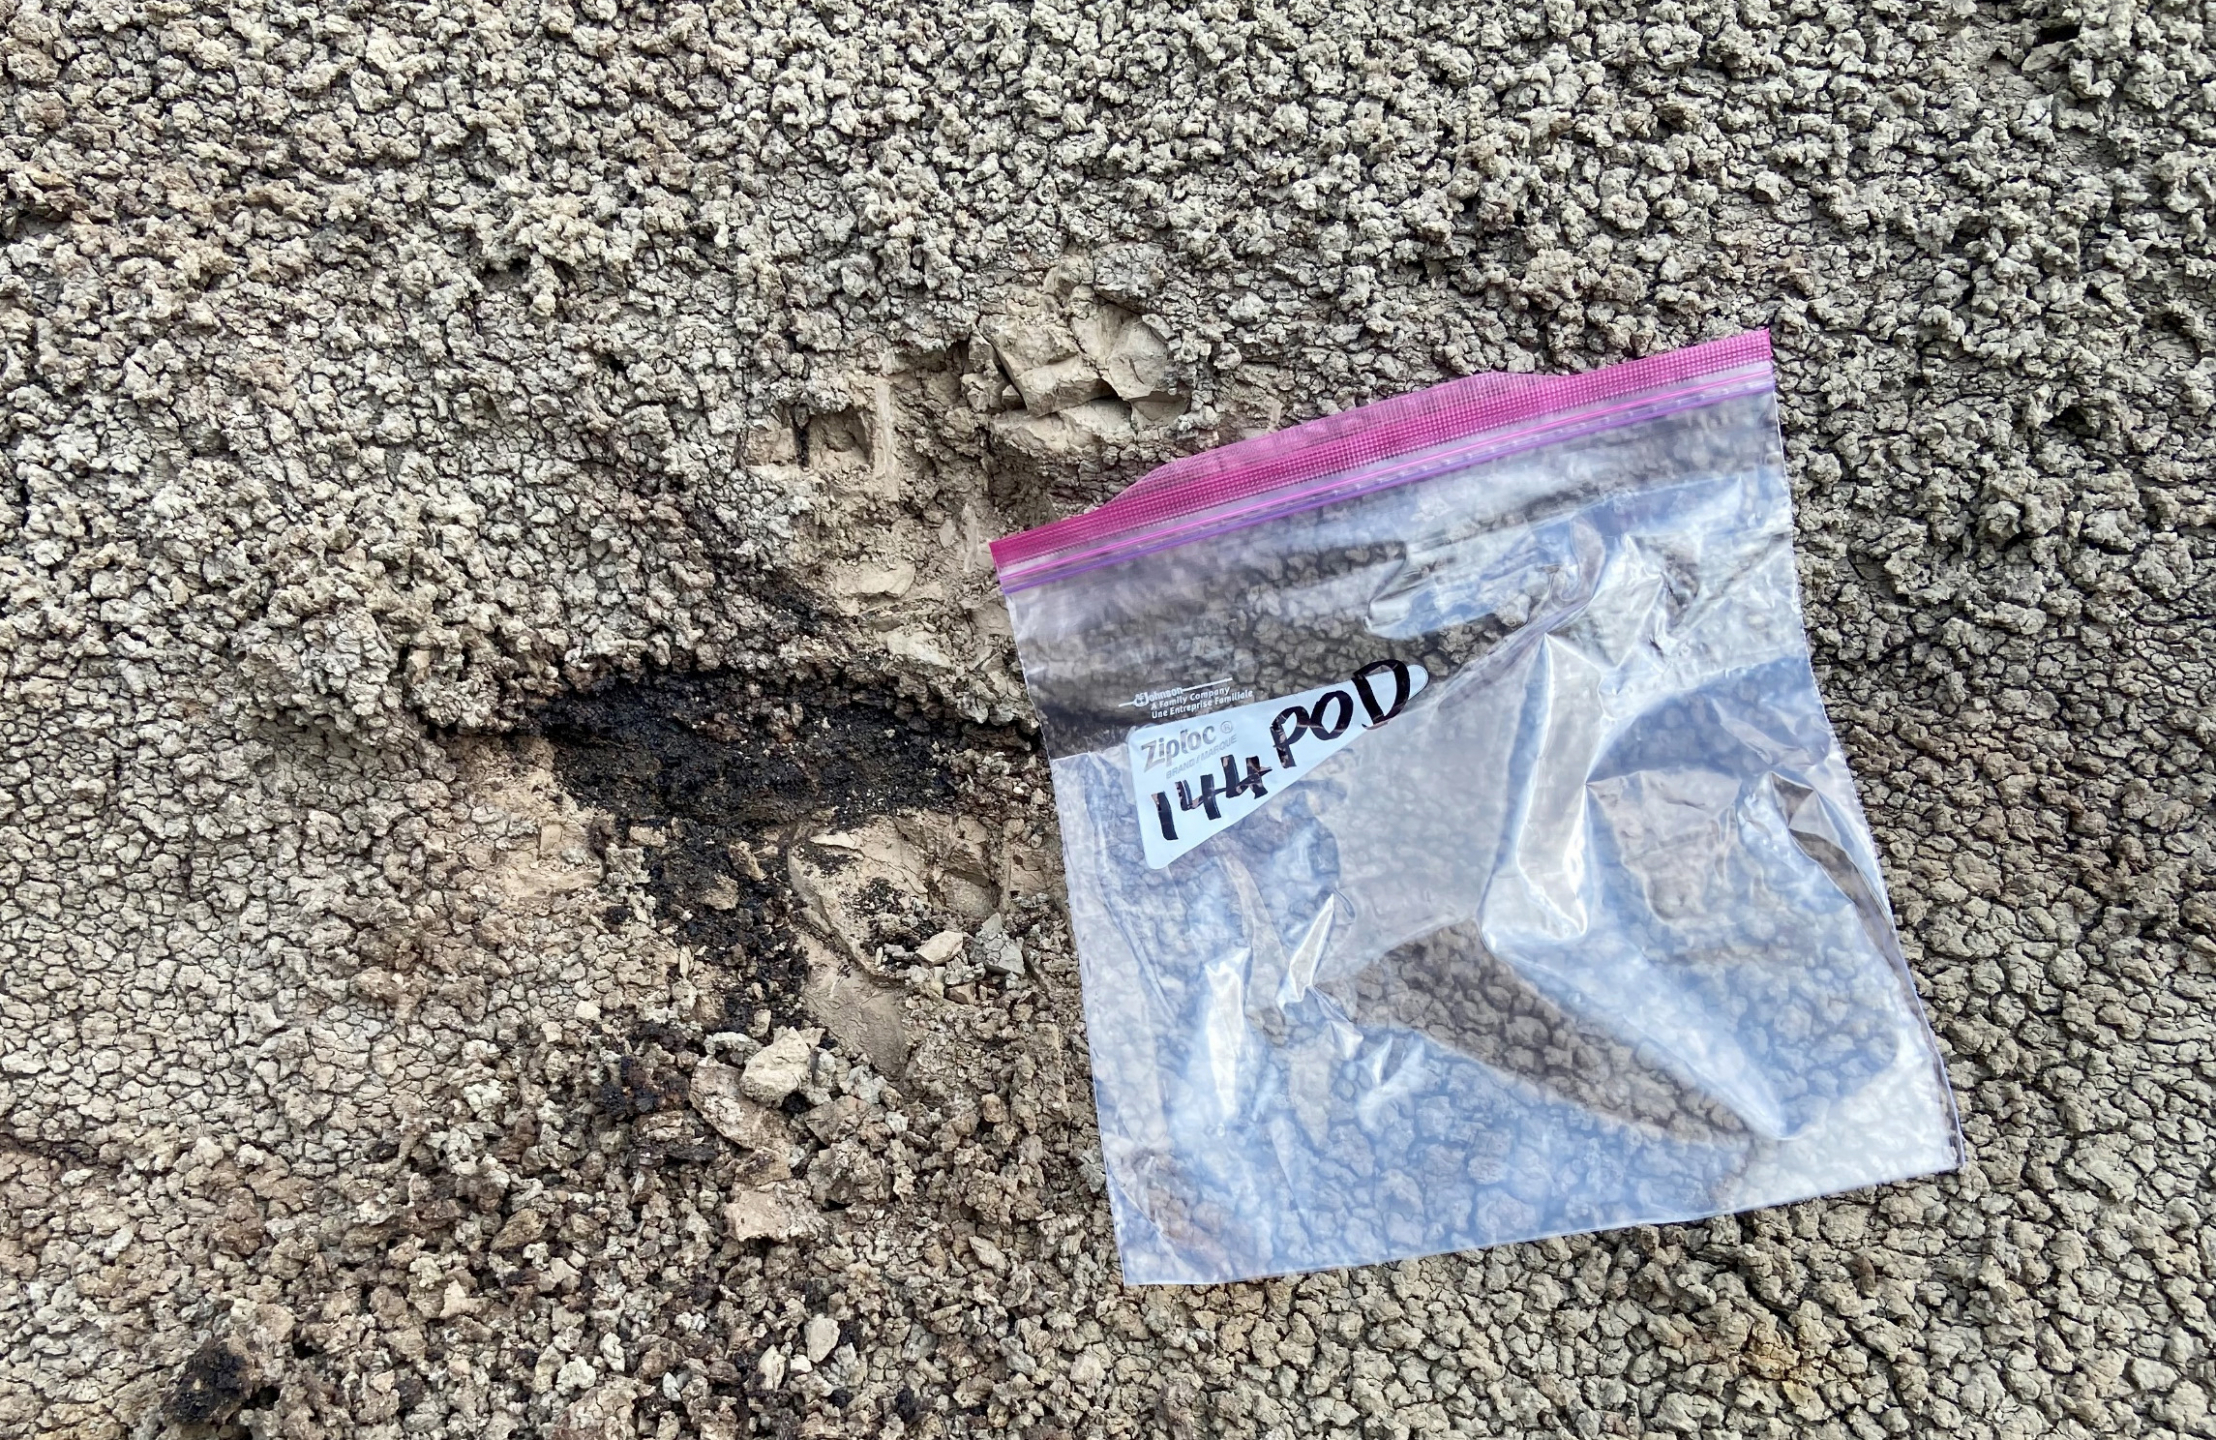 A labeled clear, plastic bag laying in the dirt near the sample area..